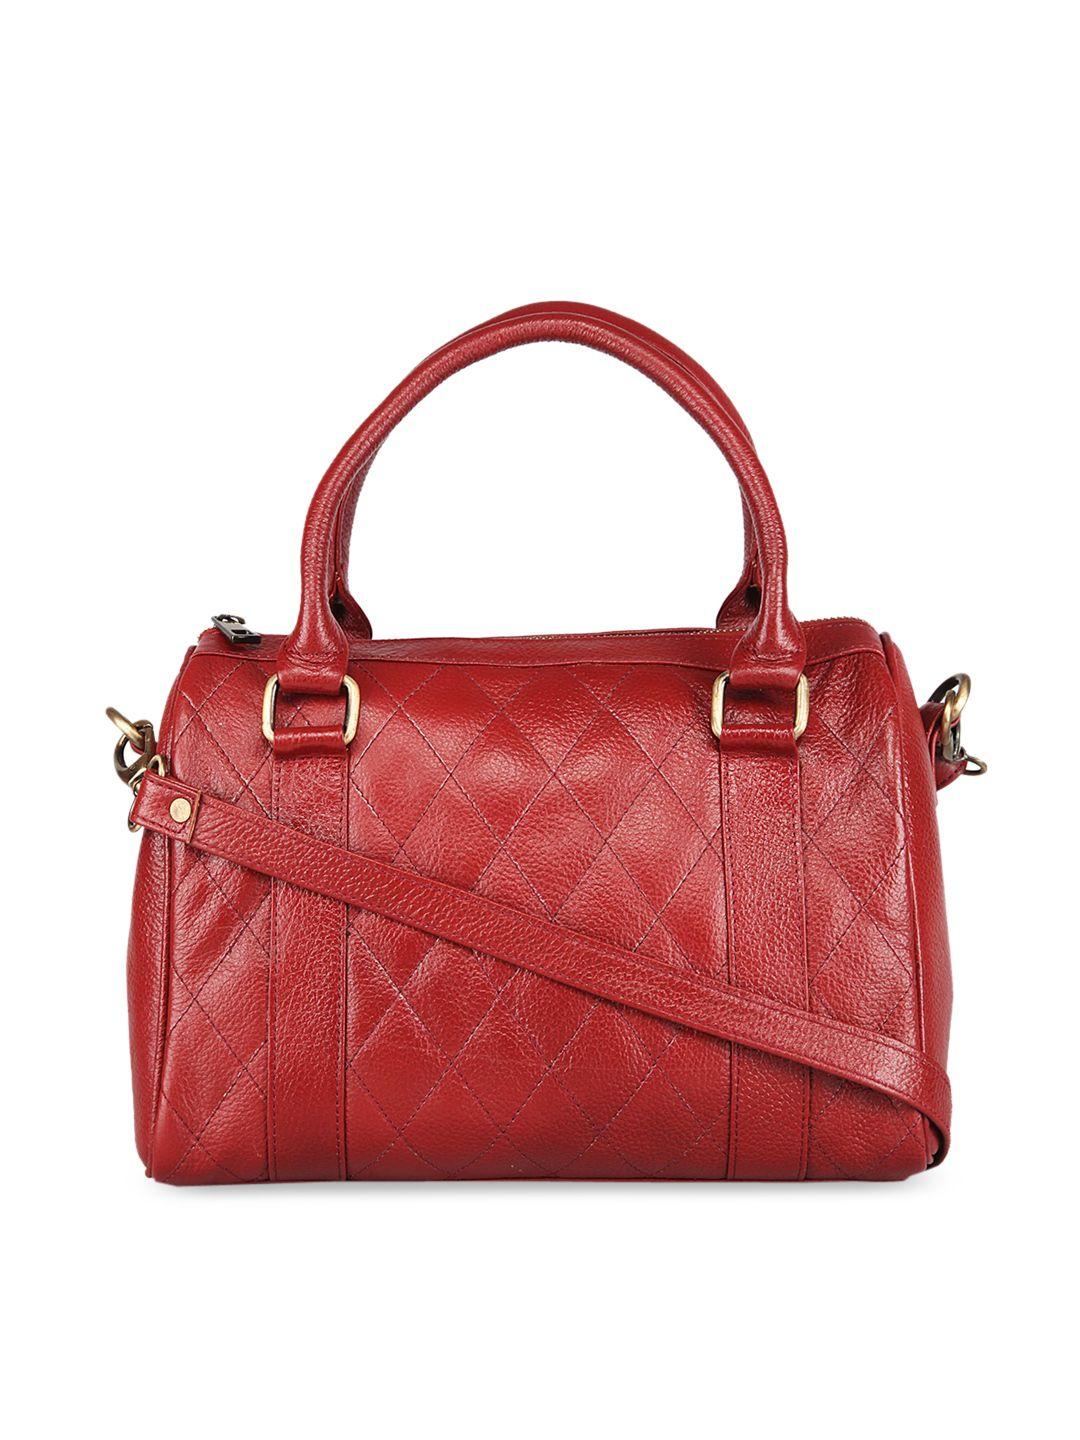 genwayne red leather structured handheld bag with quilted